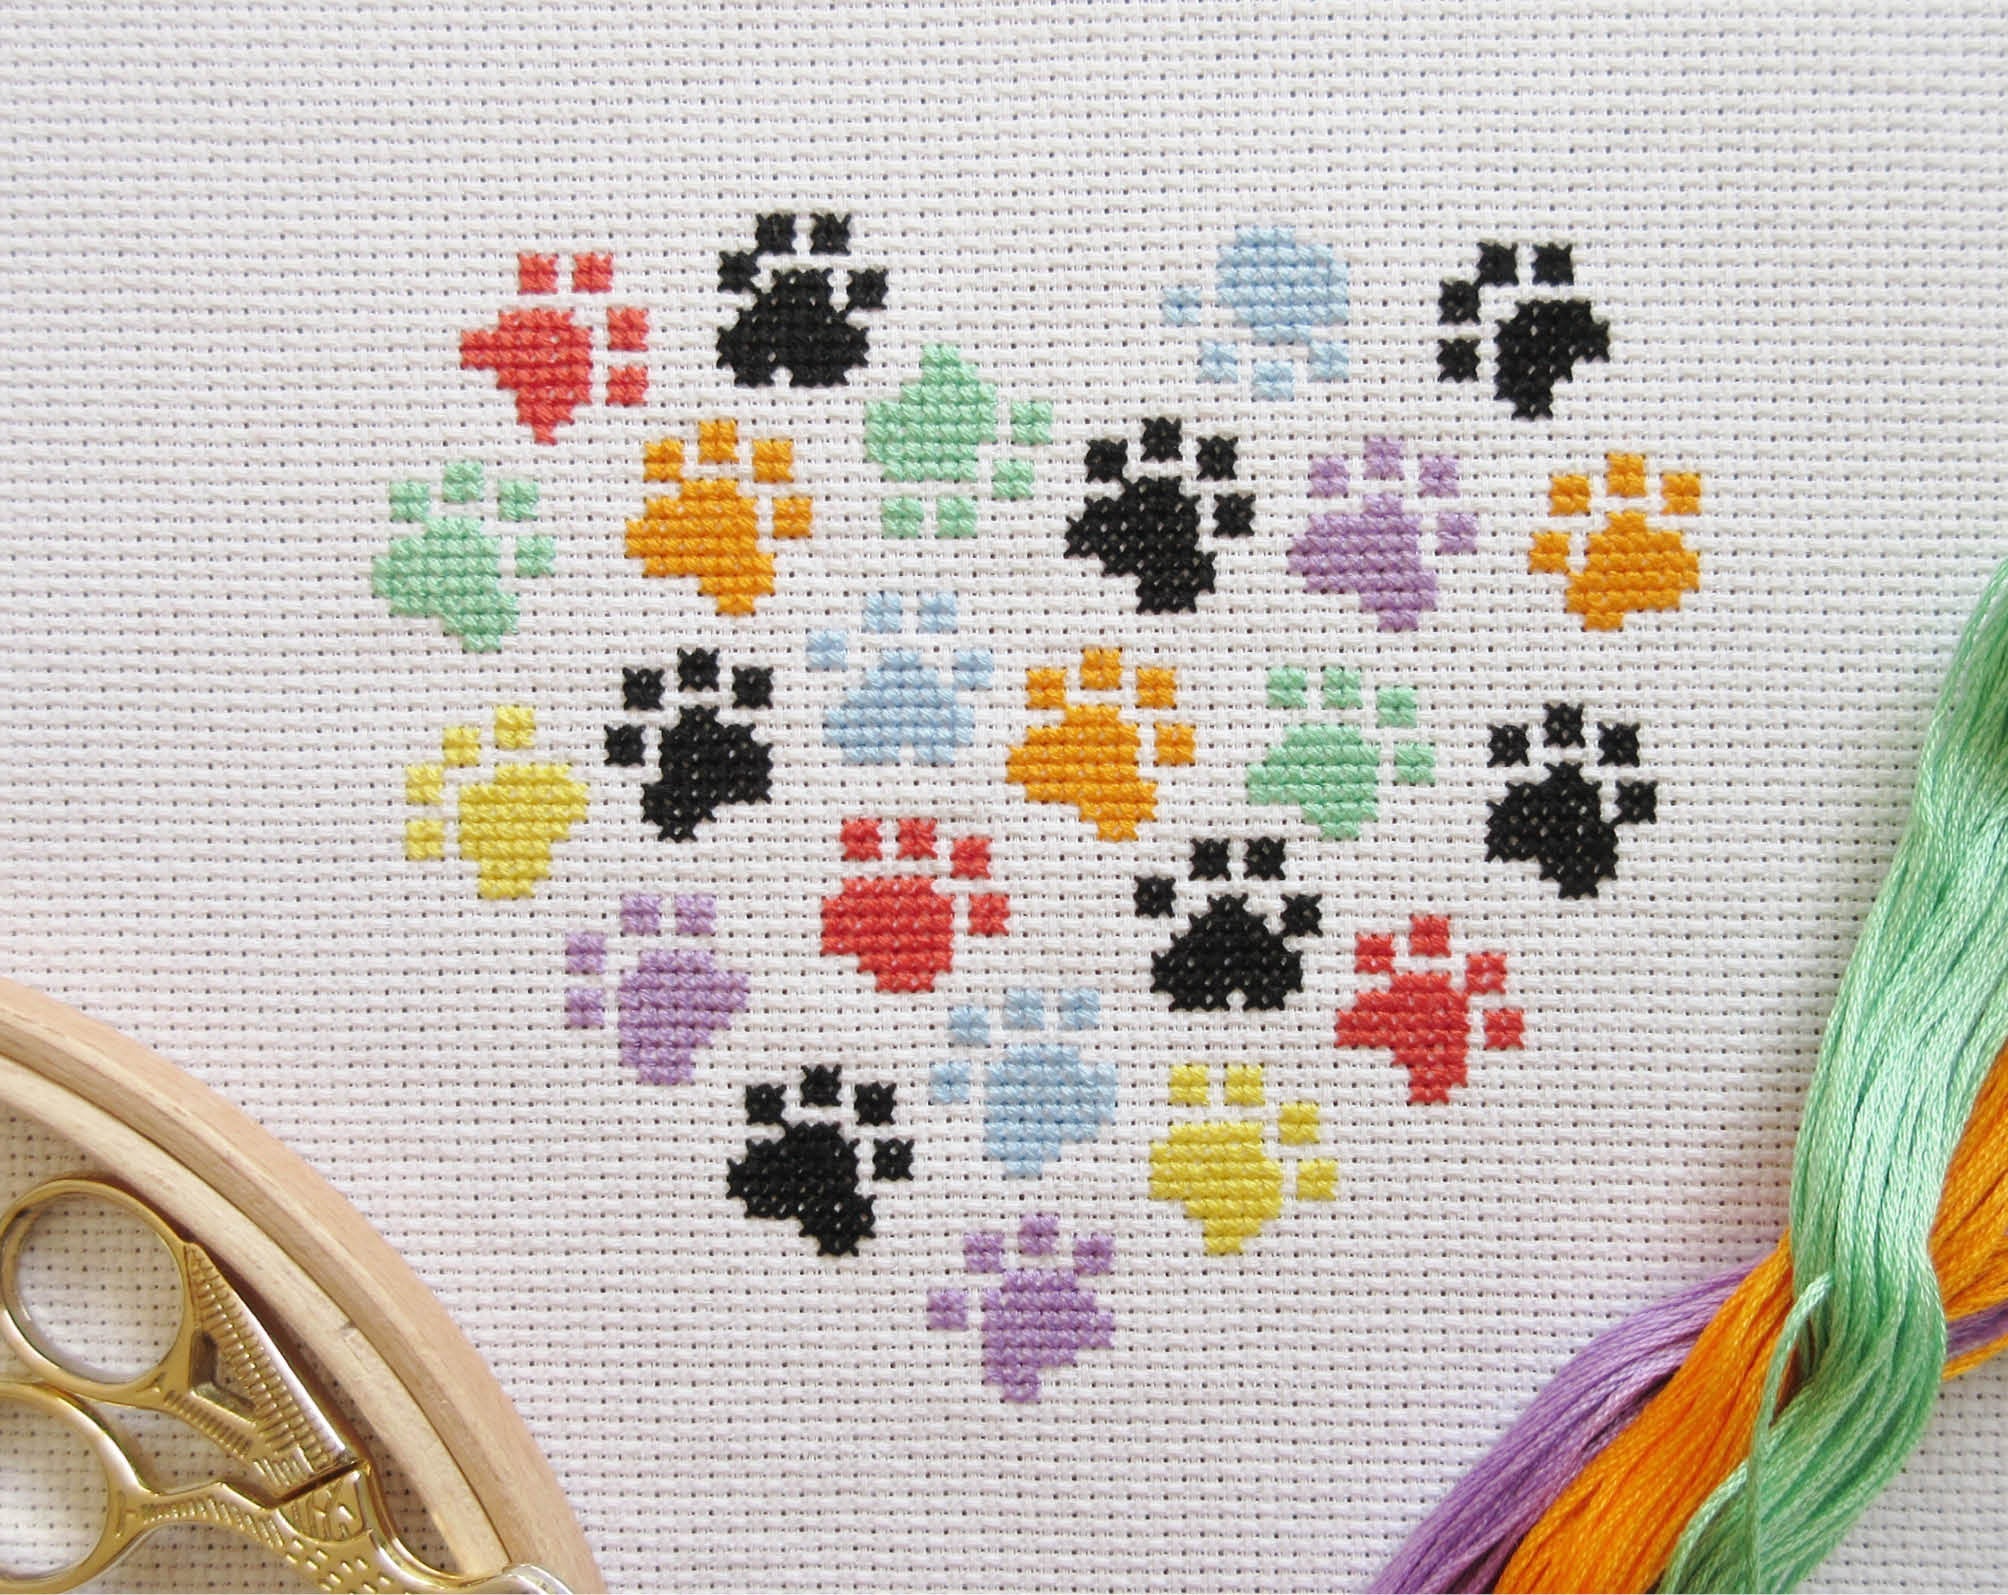 Stitched image of smaller paw print heart cross stitch pattern, with stitching materials